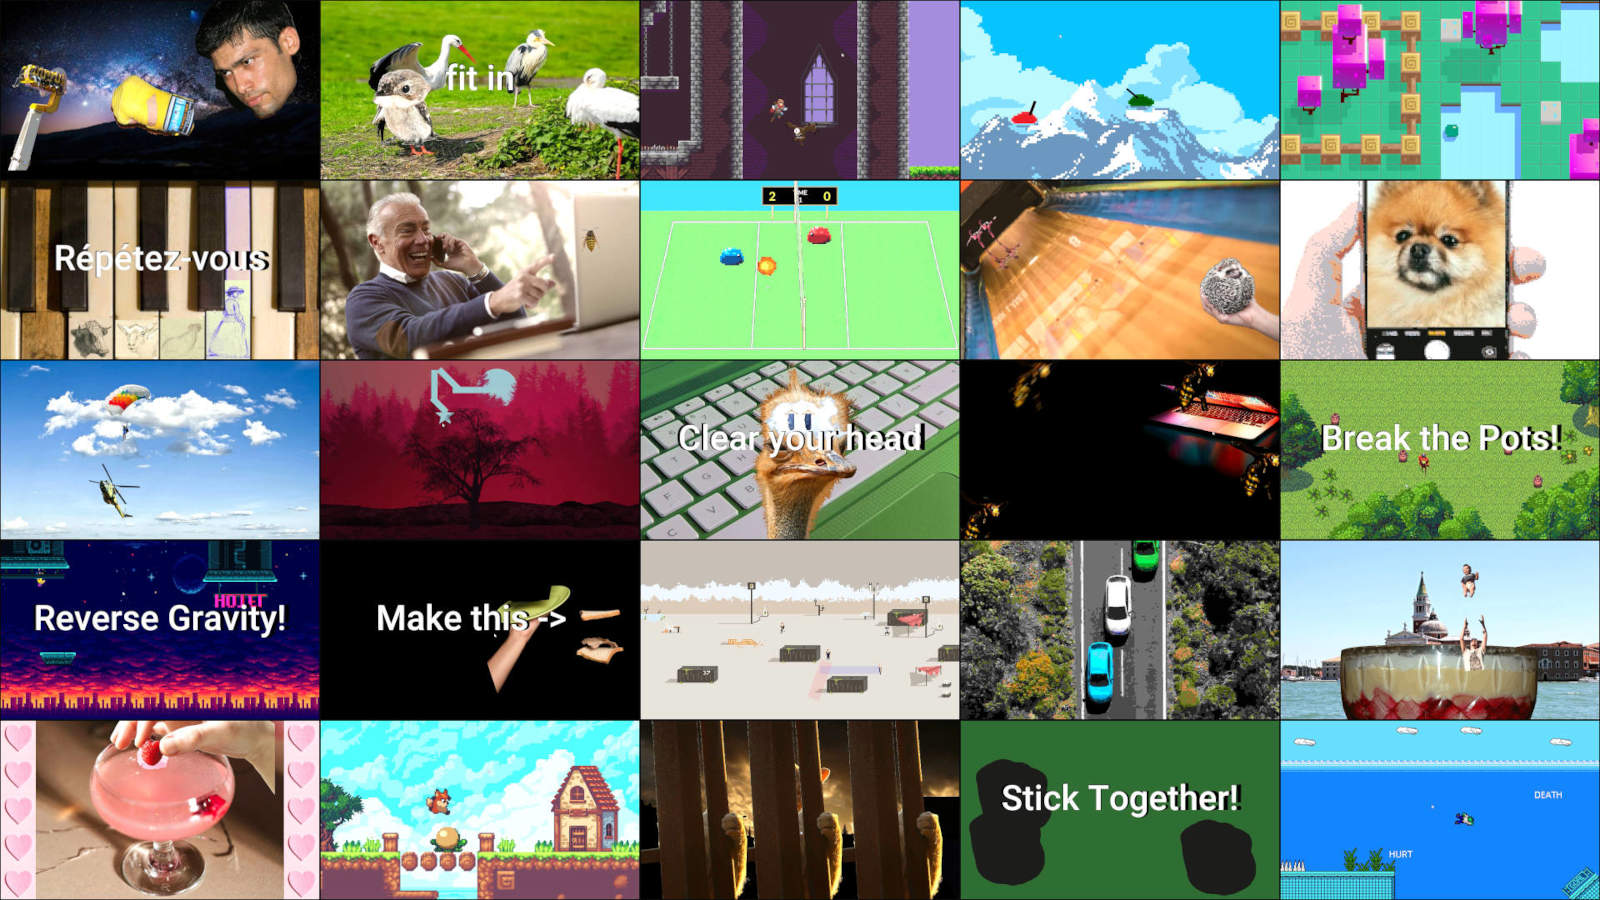 Grid of Weegames minigames